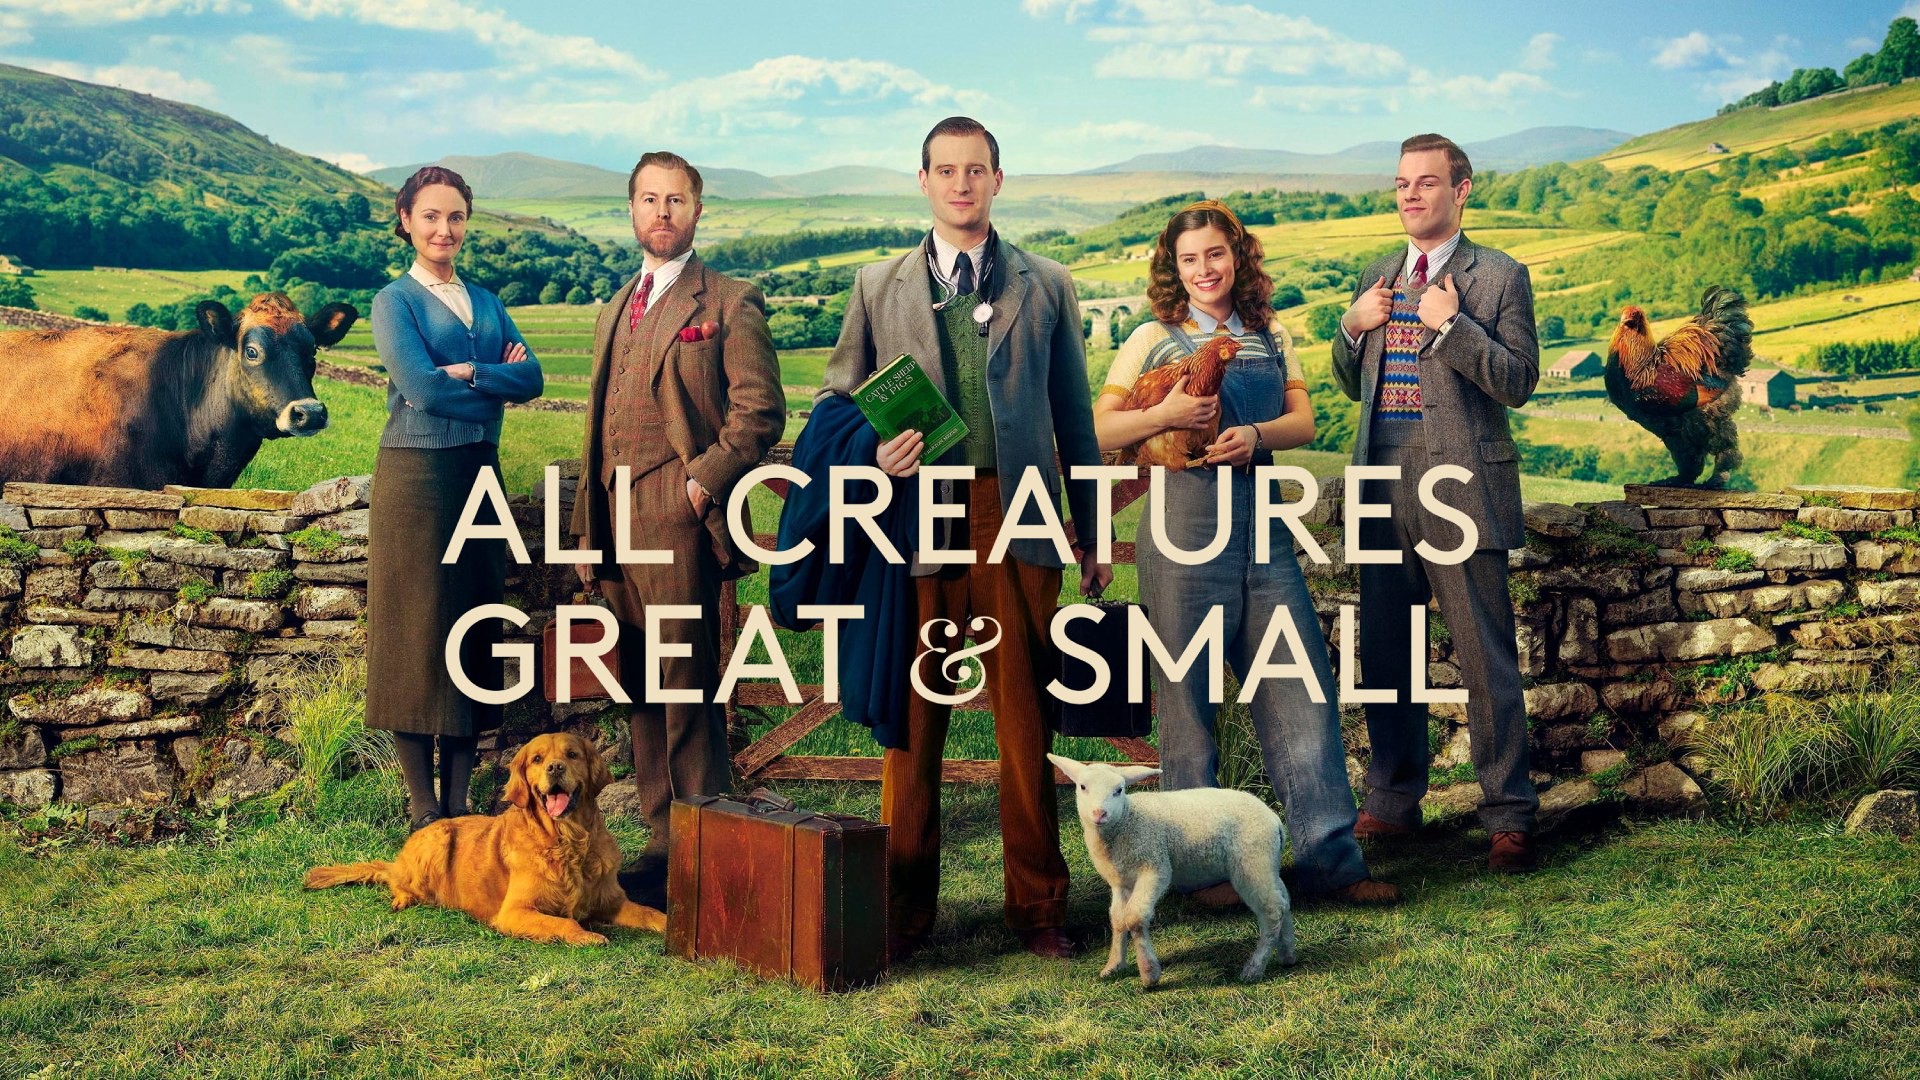 All Creatures Great and Small: Overview, Synopsis and Cast - DroidJournal